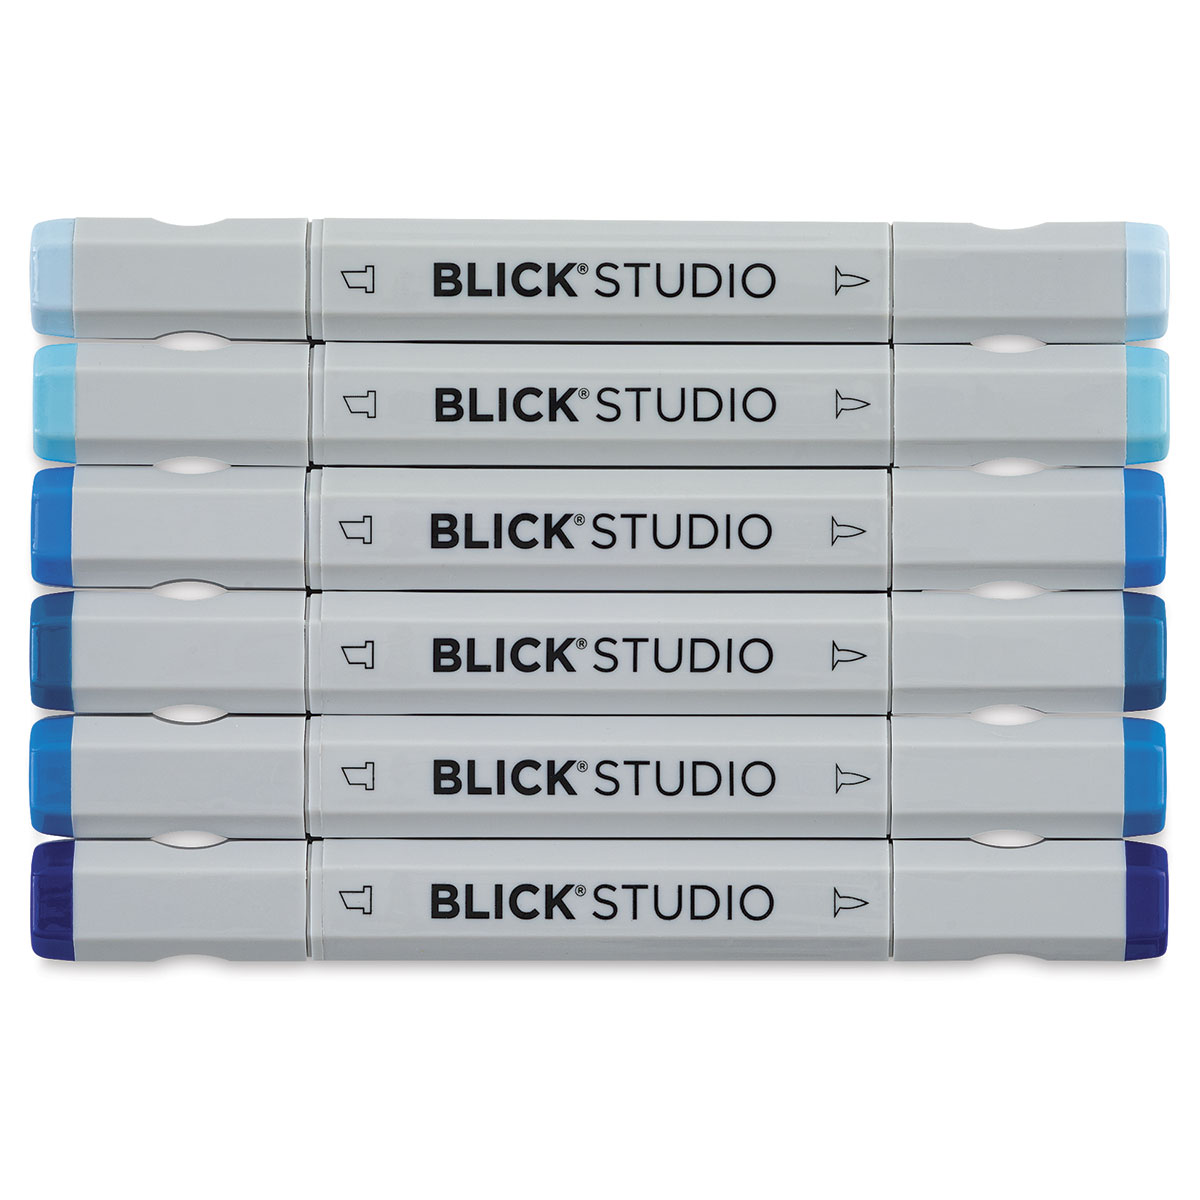 Blick Studio Brush Markers - Assorted Colors, Set of 6